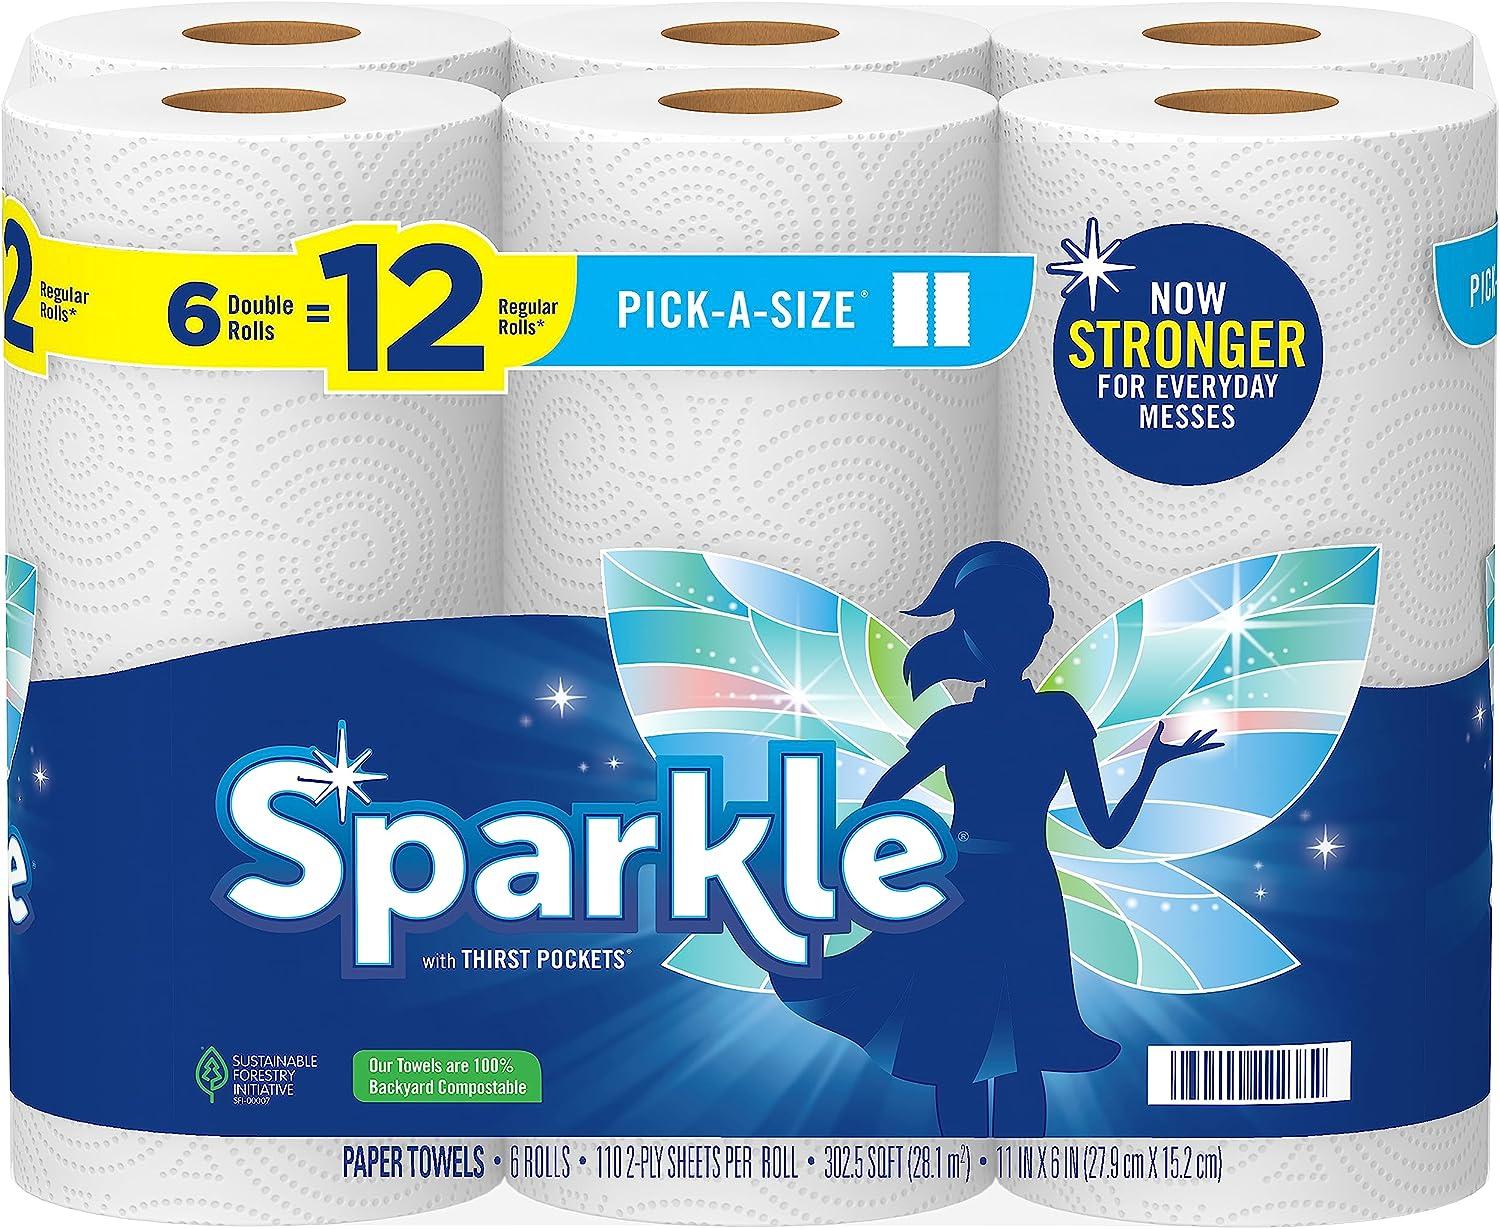 6 Sparkle Pick-A-Size 2-Ply Double Roll Paper Towels for $6.92 Shipped